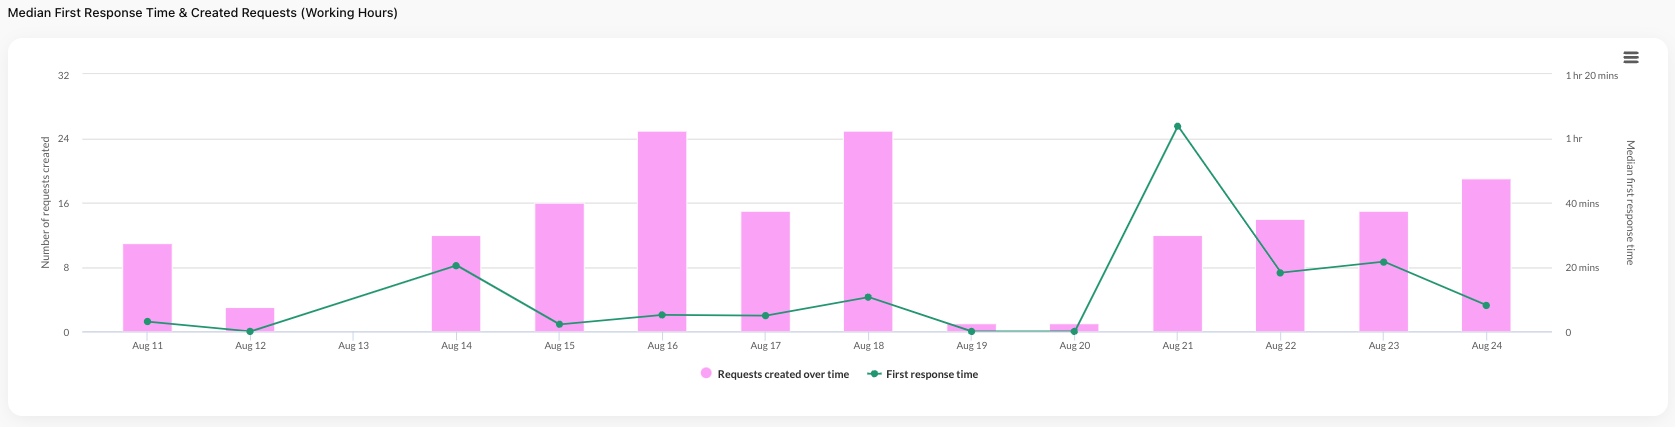 Median First Response Time & Created Requests